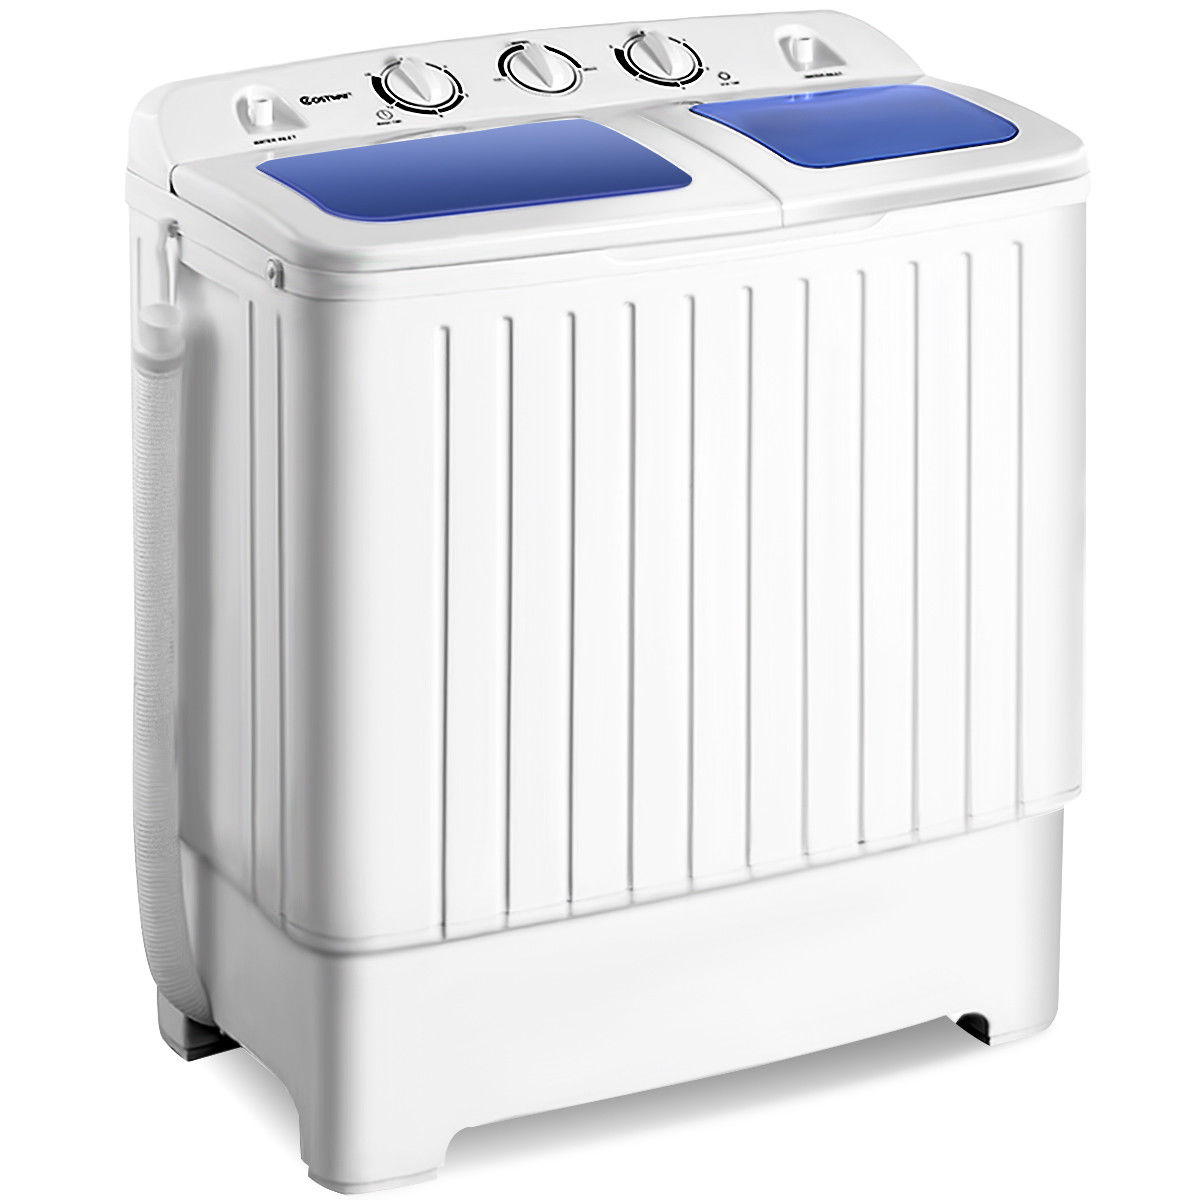 Costway 17.6lb Portable Mini Compact Twin Tub  Washing Machine Washer Spin Dryer - image 1 of 9